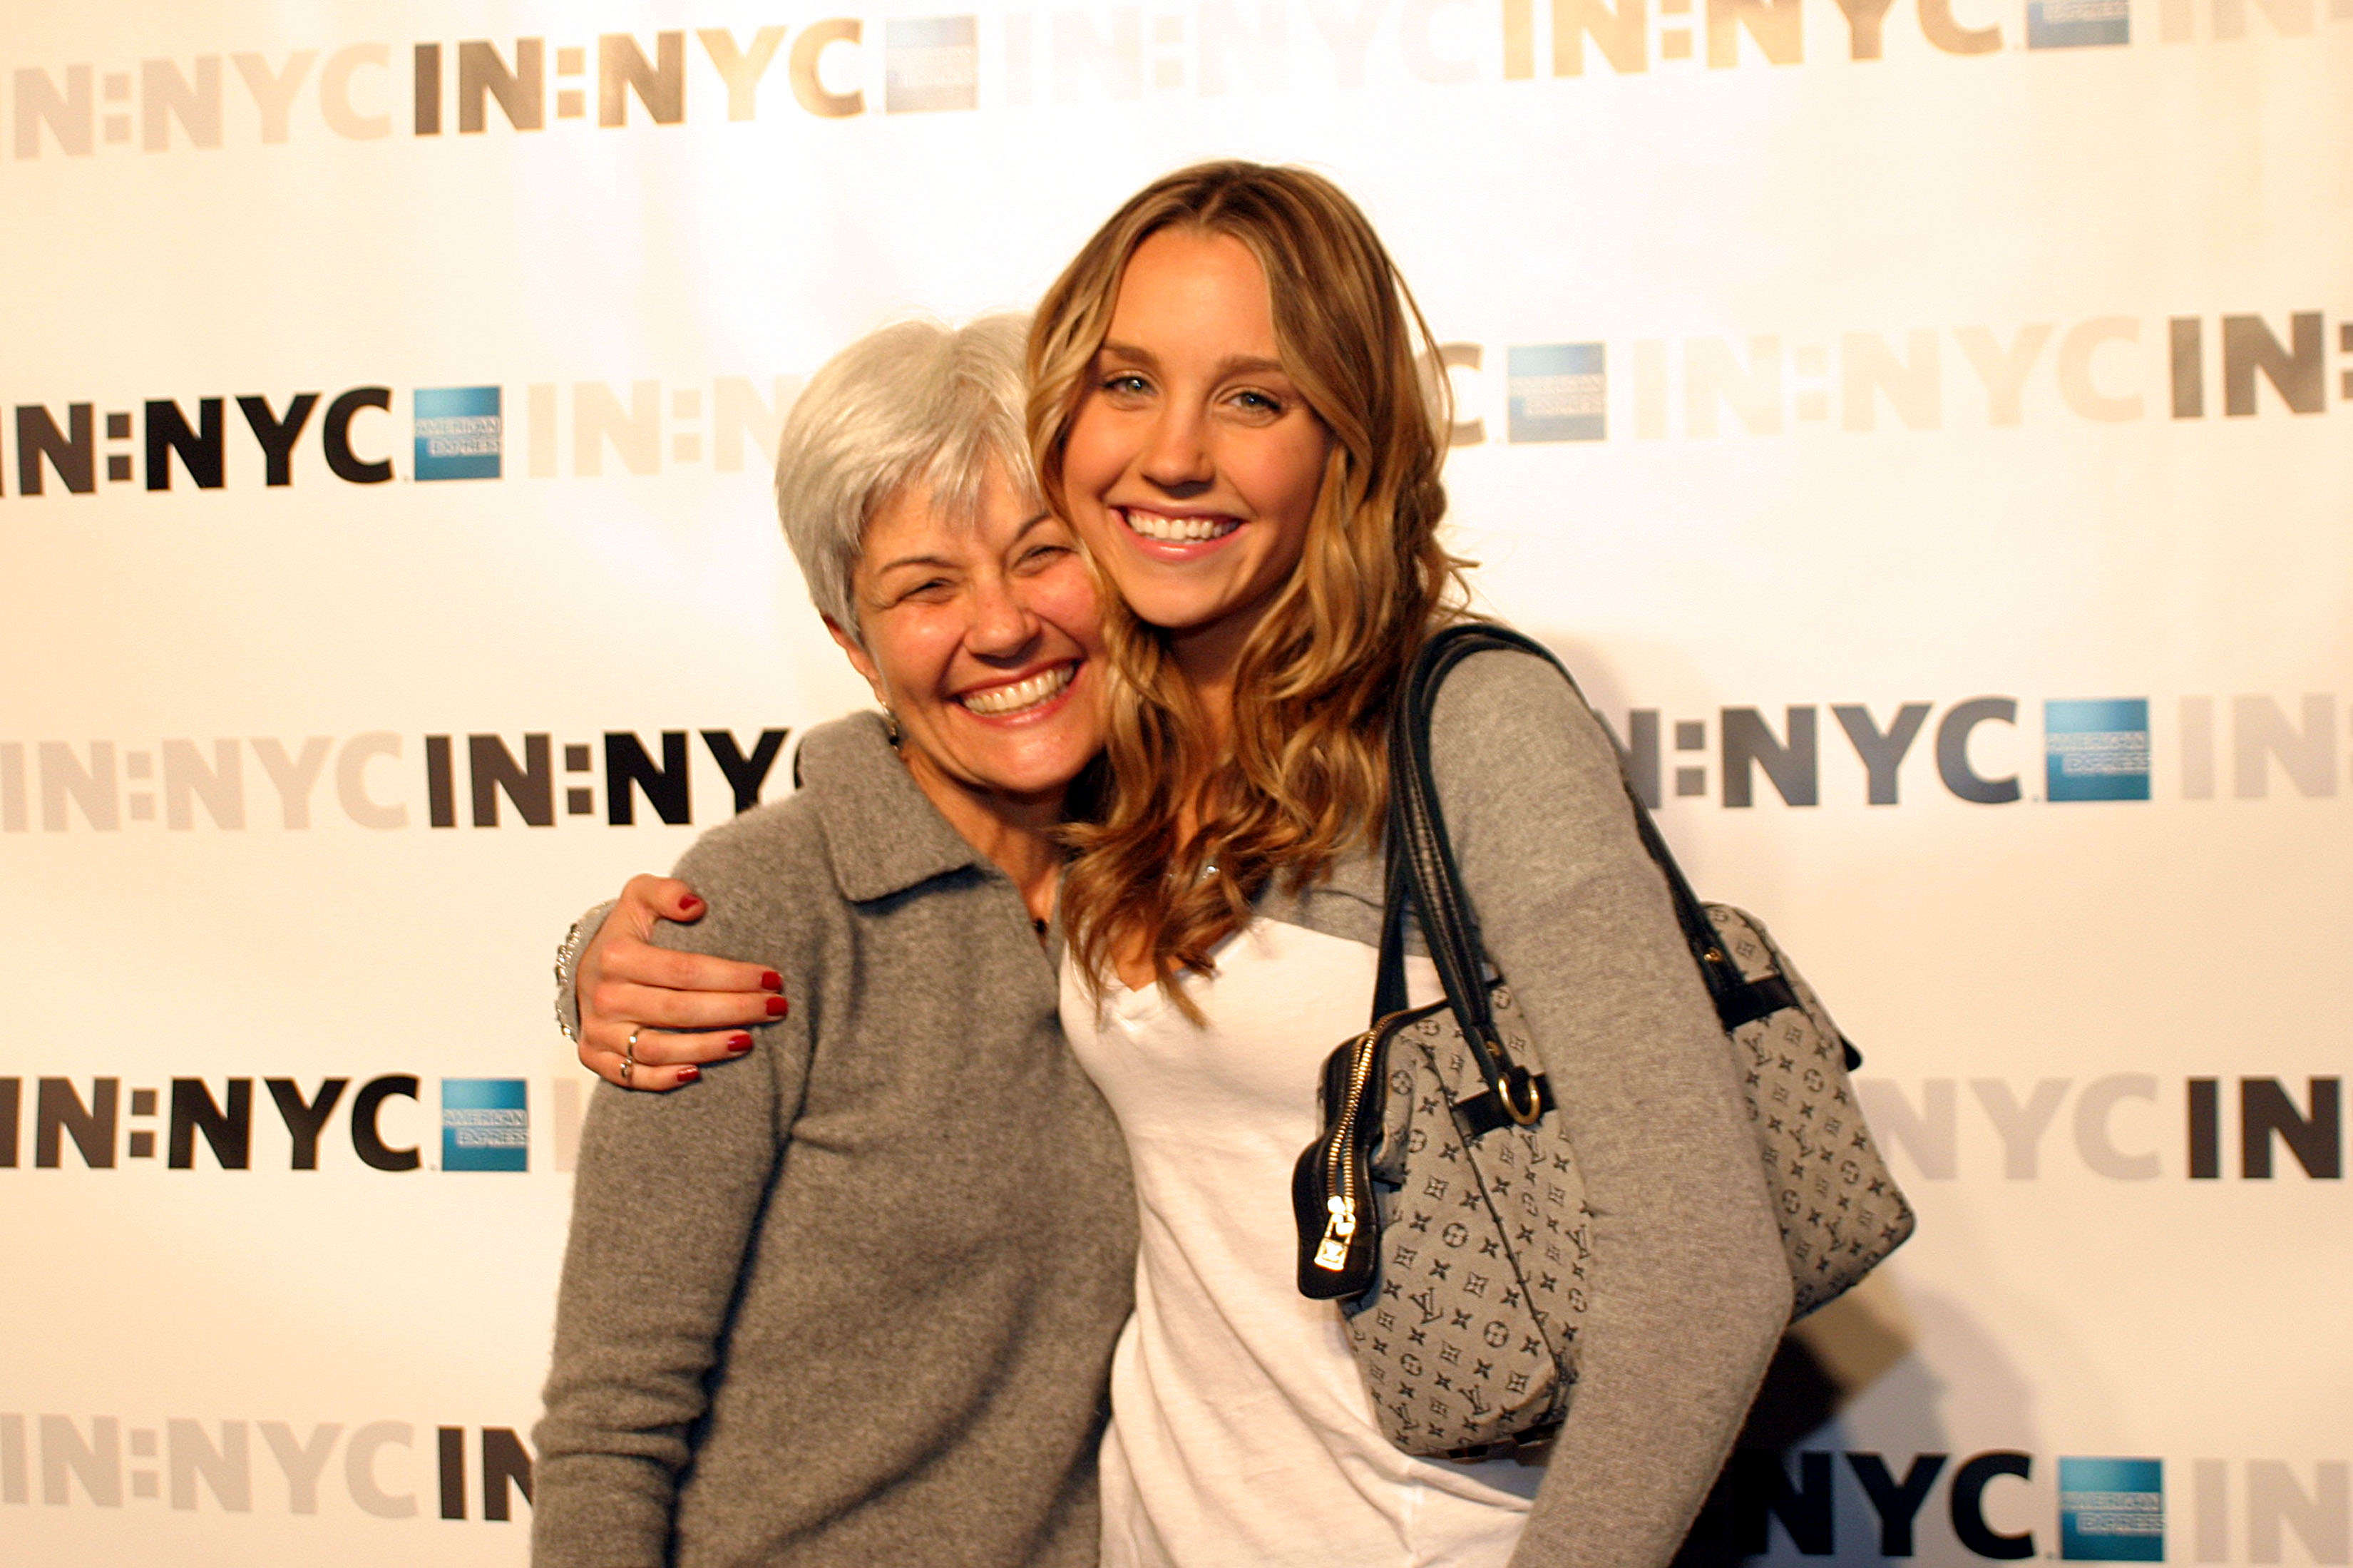 Actress Amanda Bynes and her mom on October 7, 2004, at Skylight, in New York City. | Source: Getty Images